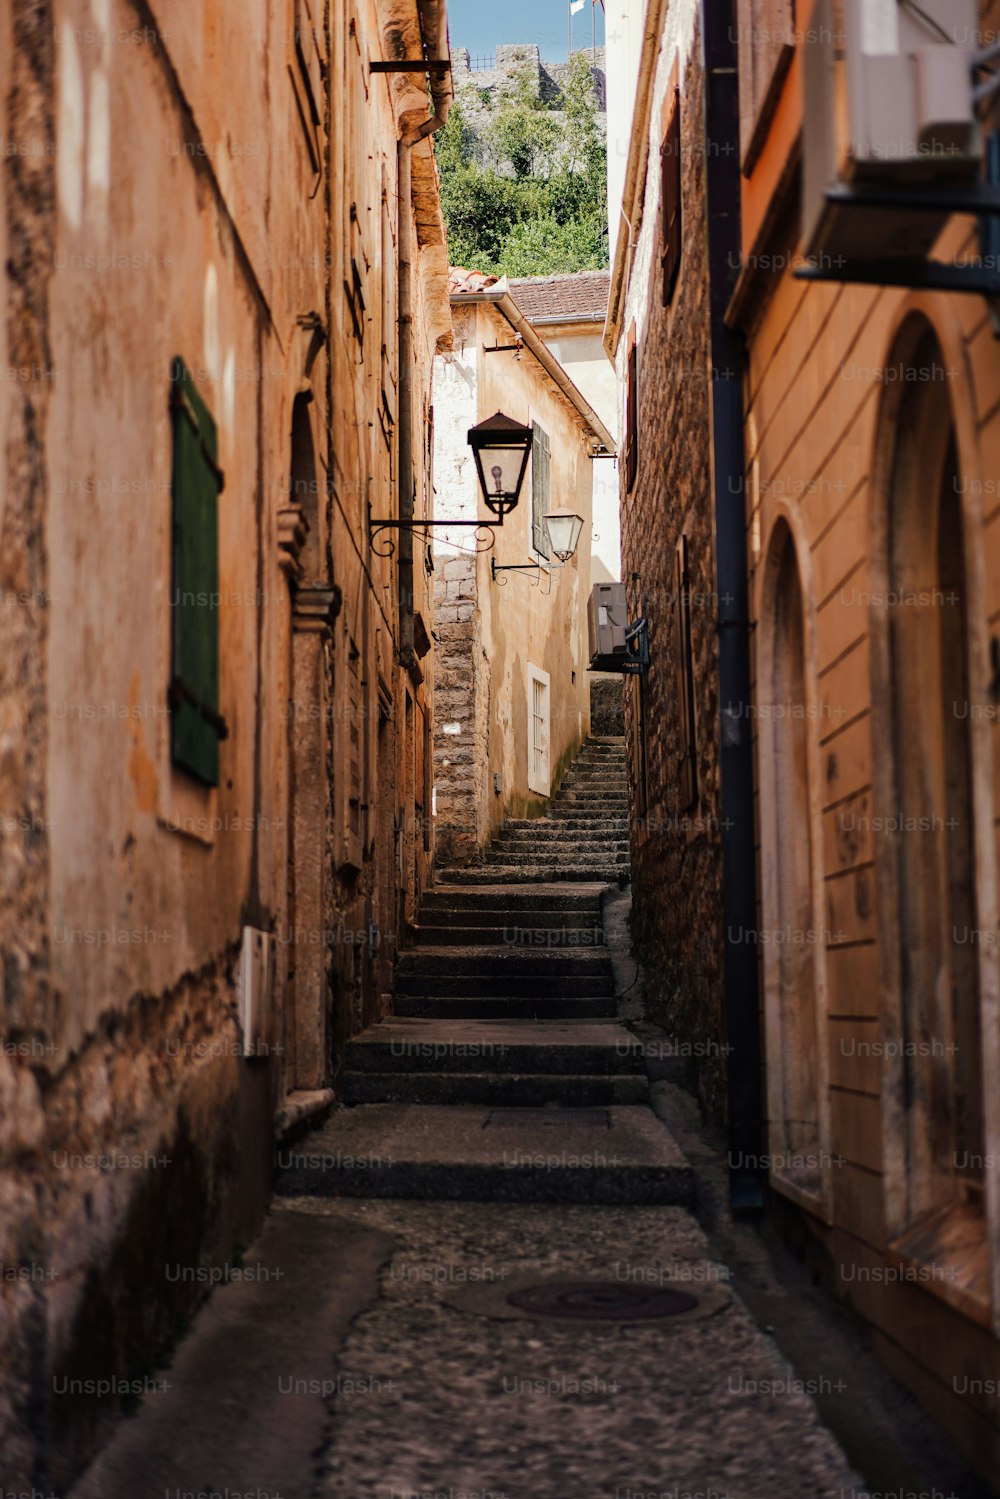 A scenic pathway through a stone alley with stairs in Herceg Novi, Montenegro